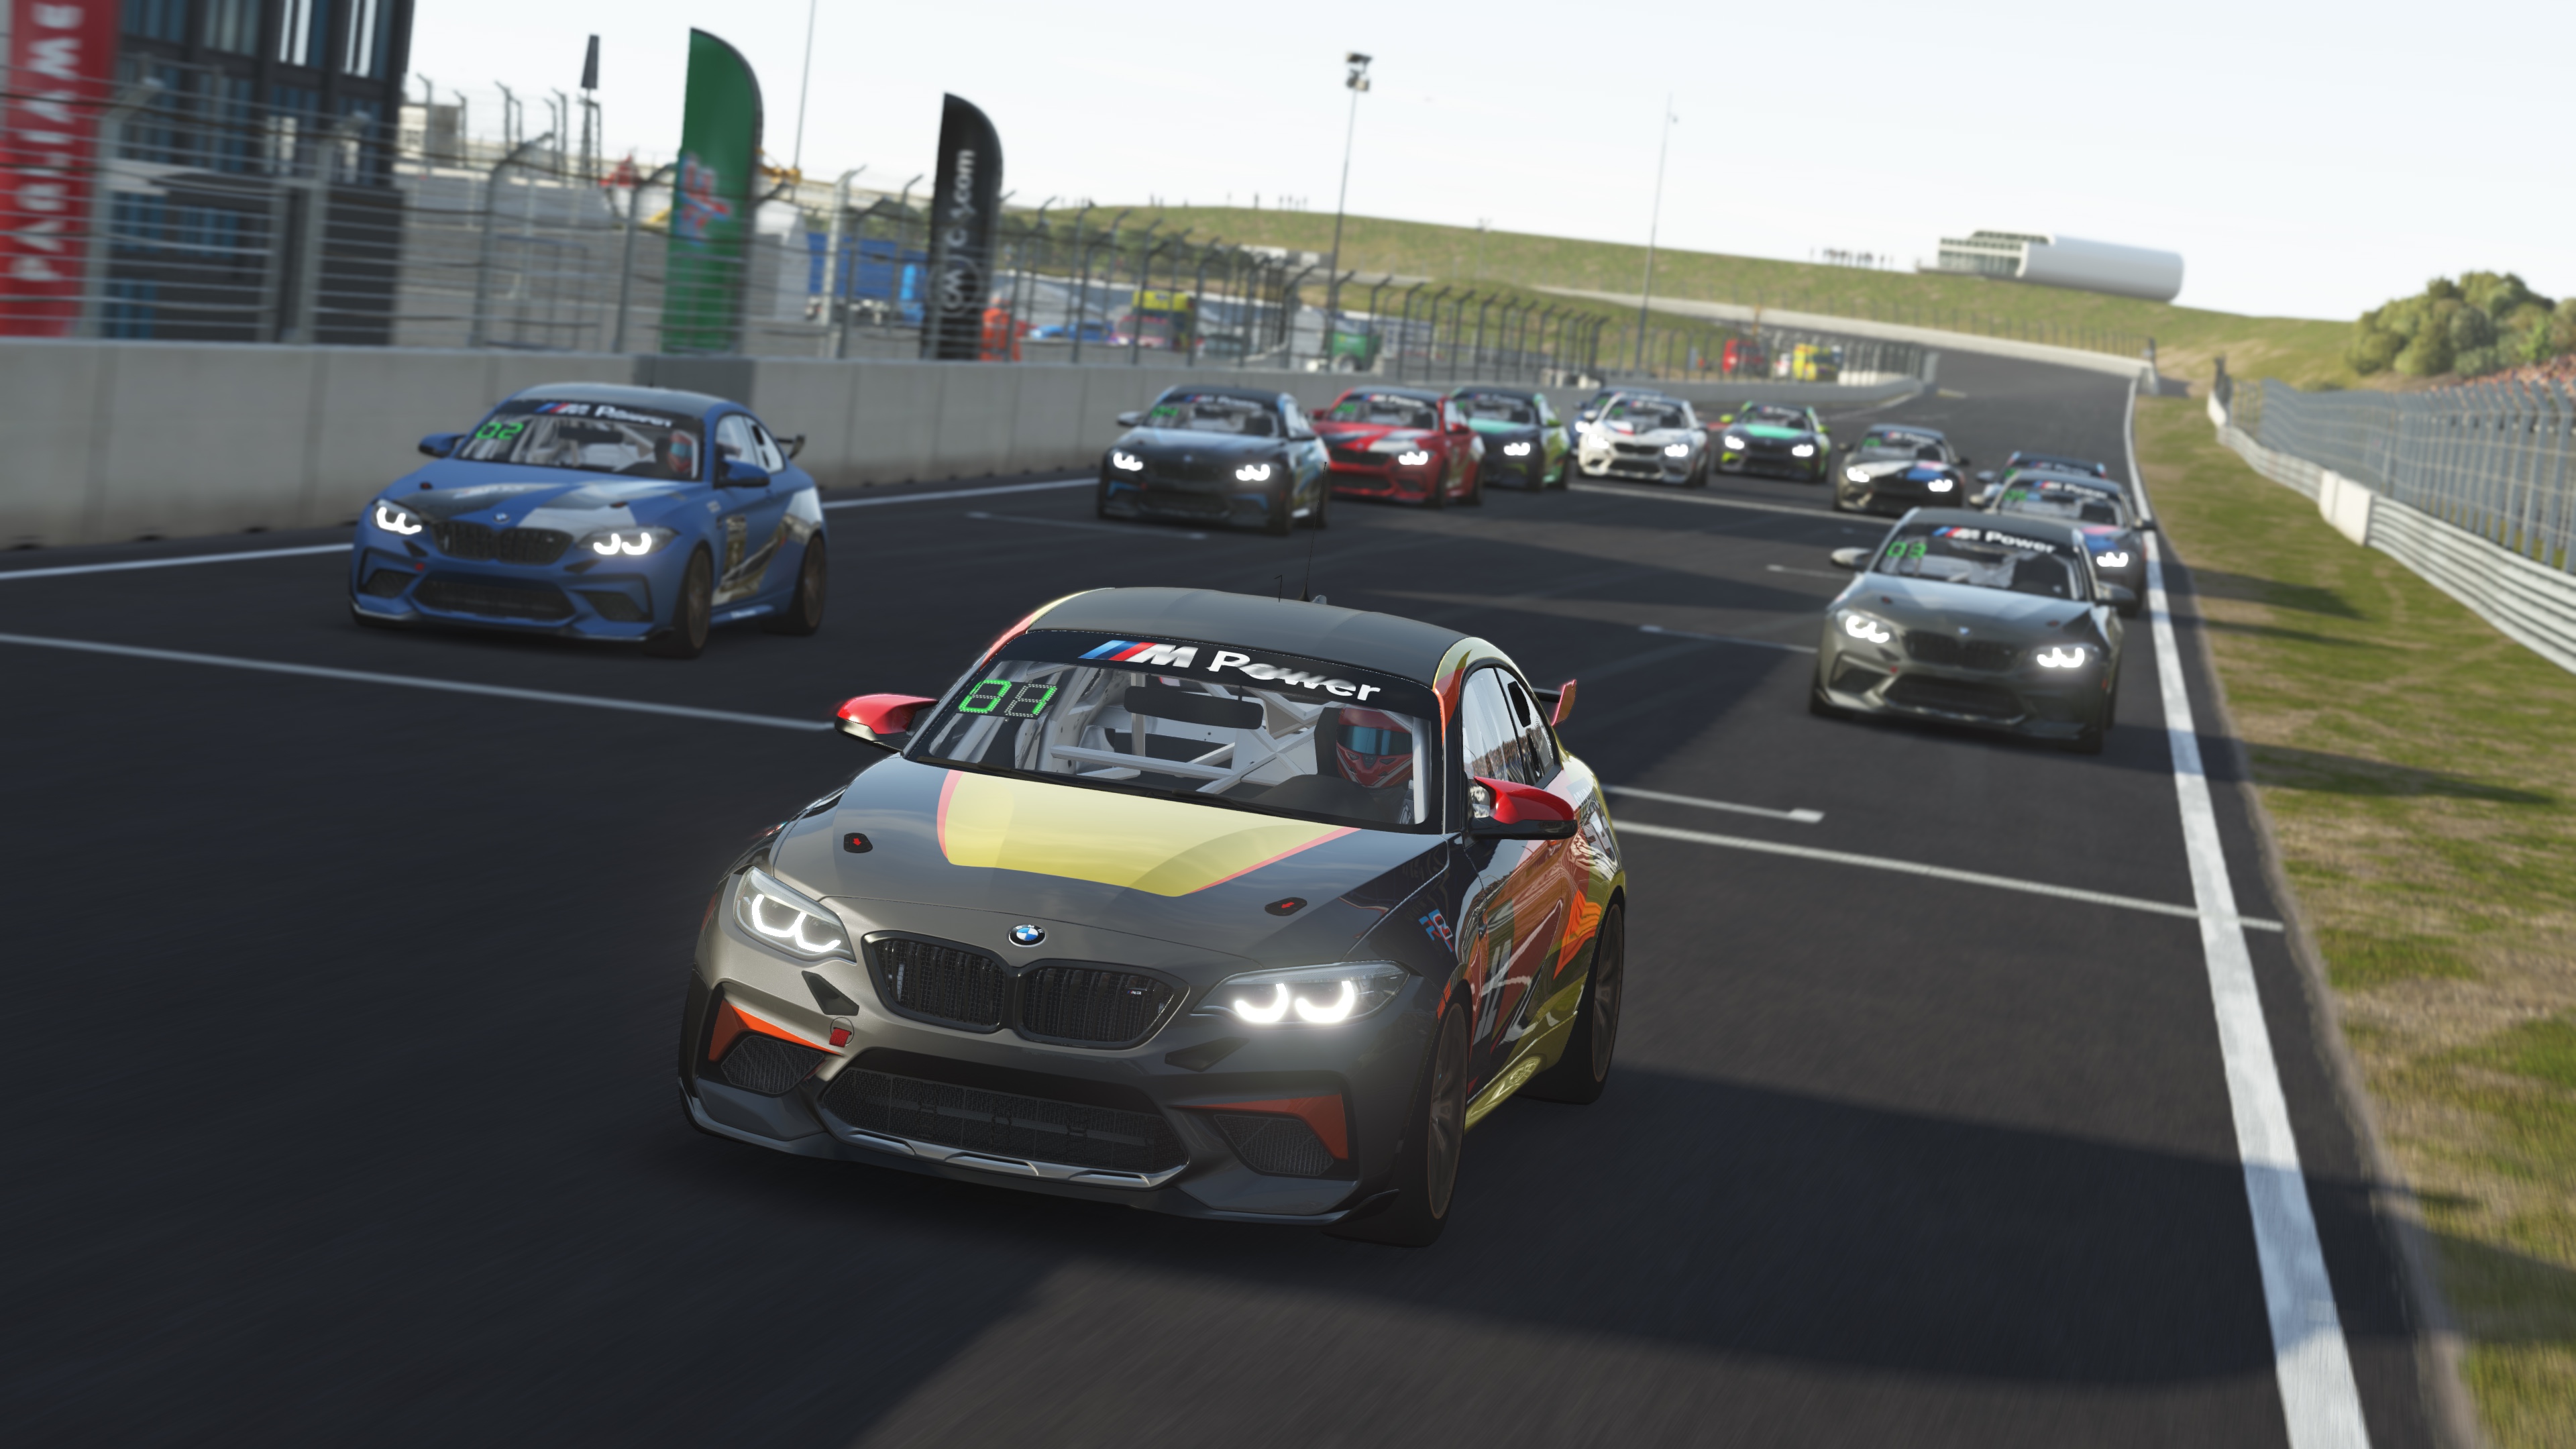 The new BMW M2 CS in rFactor 2 with updated tyres, liveries and more!